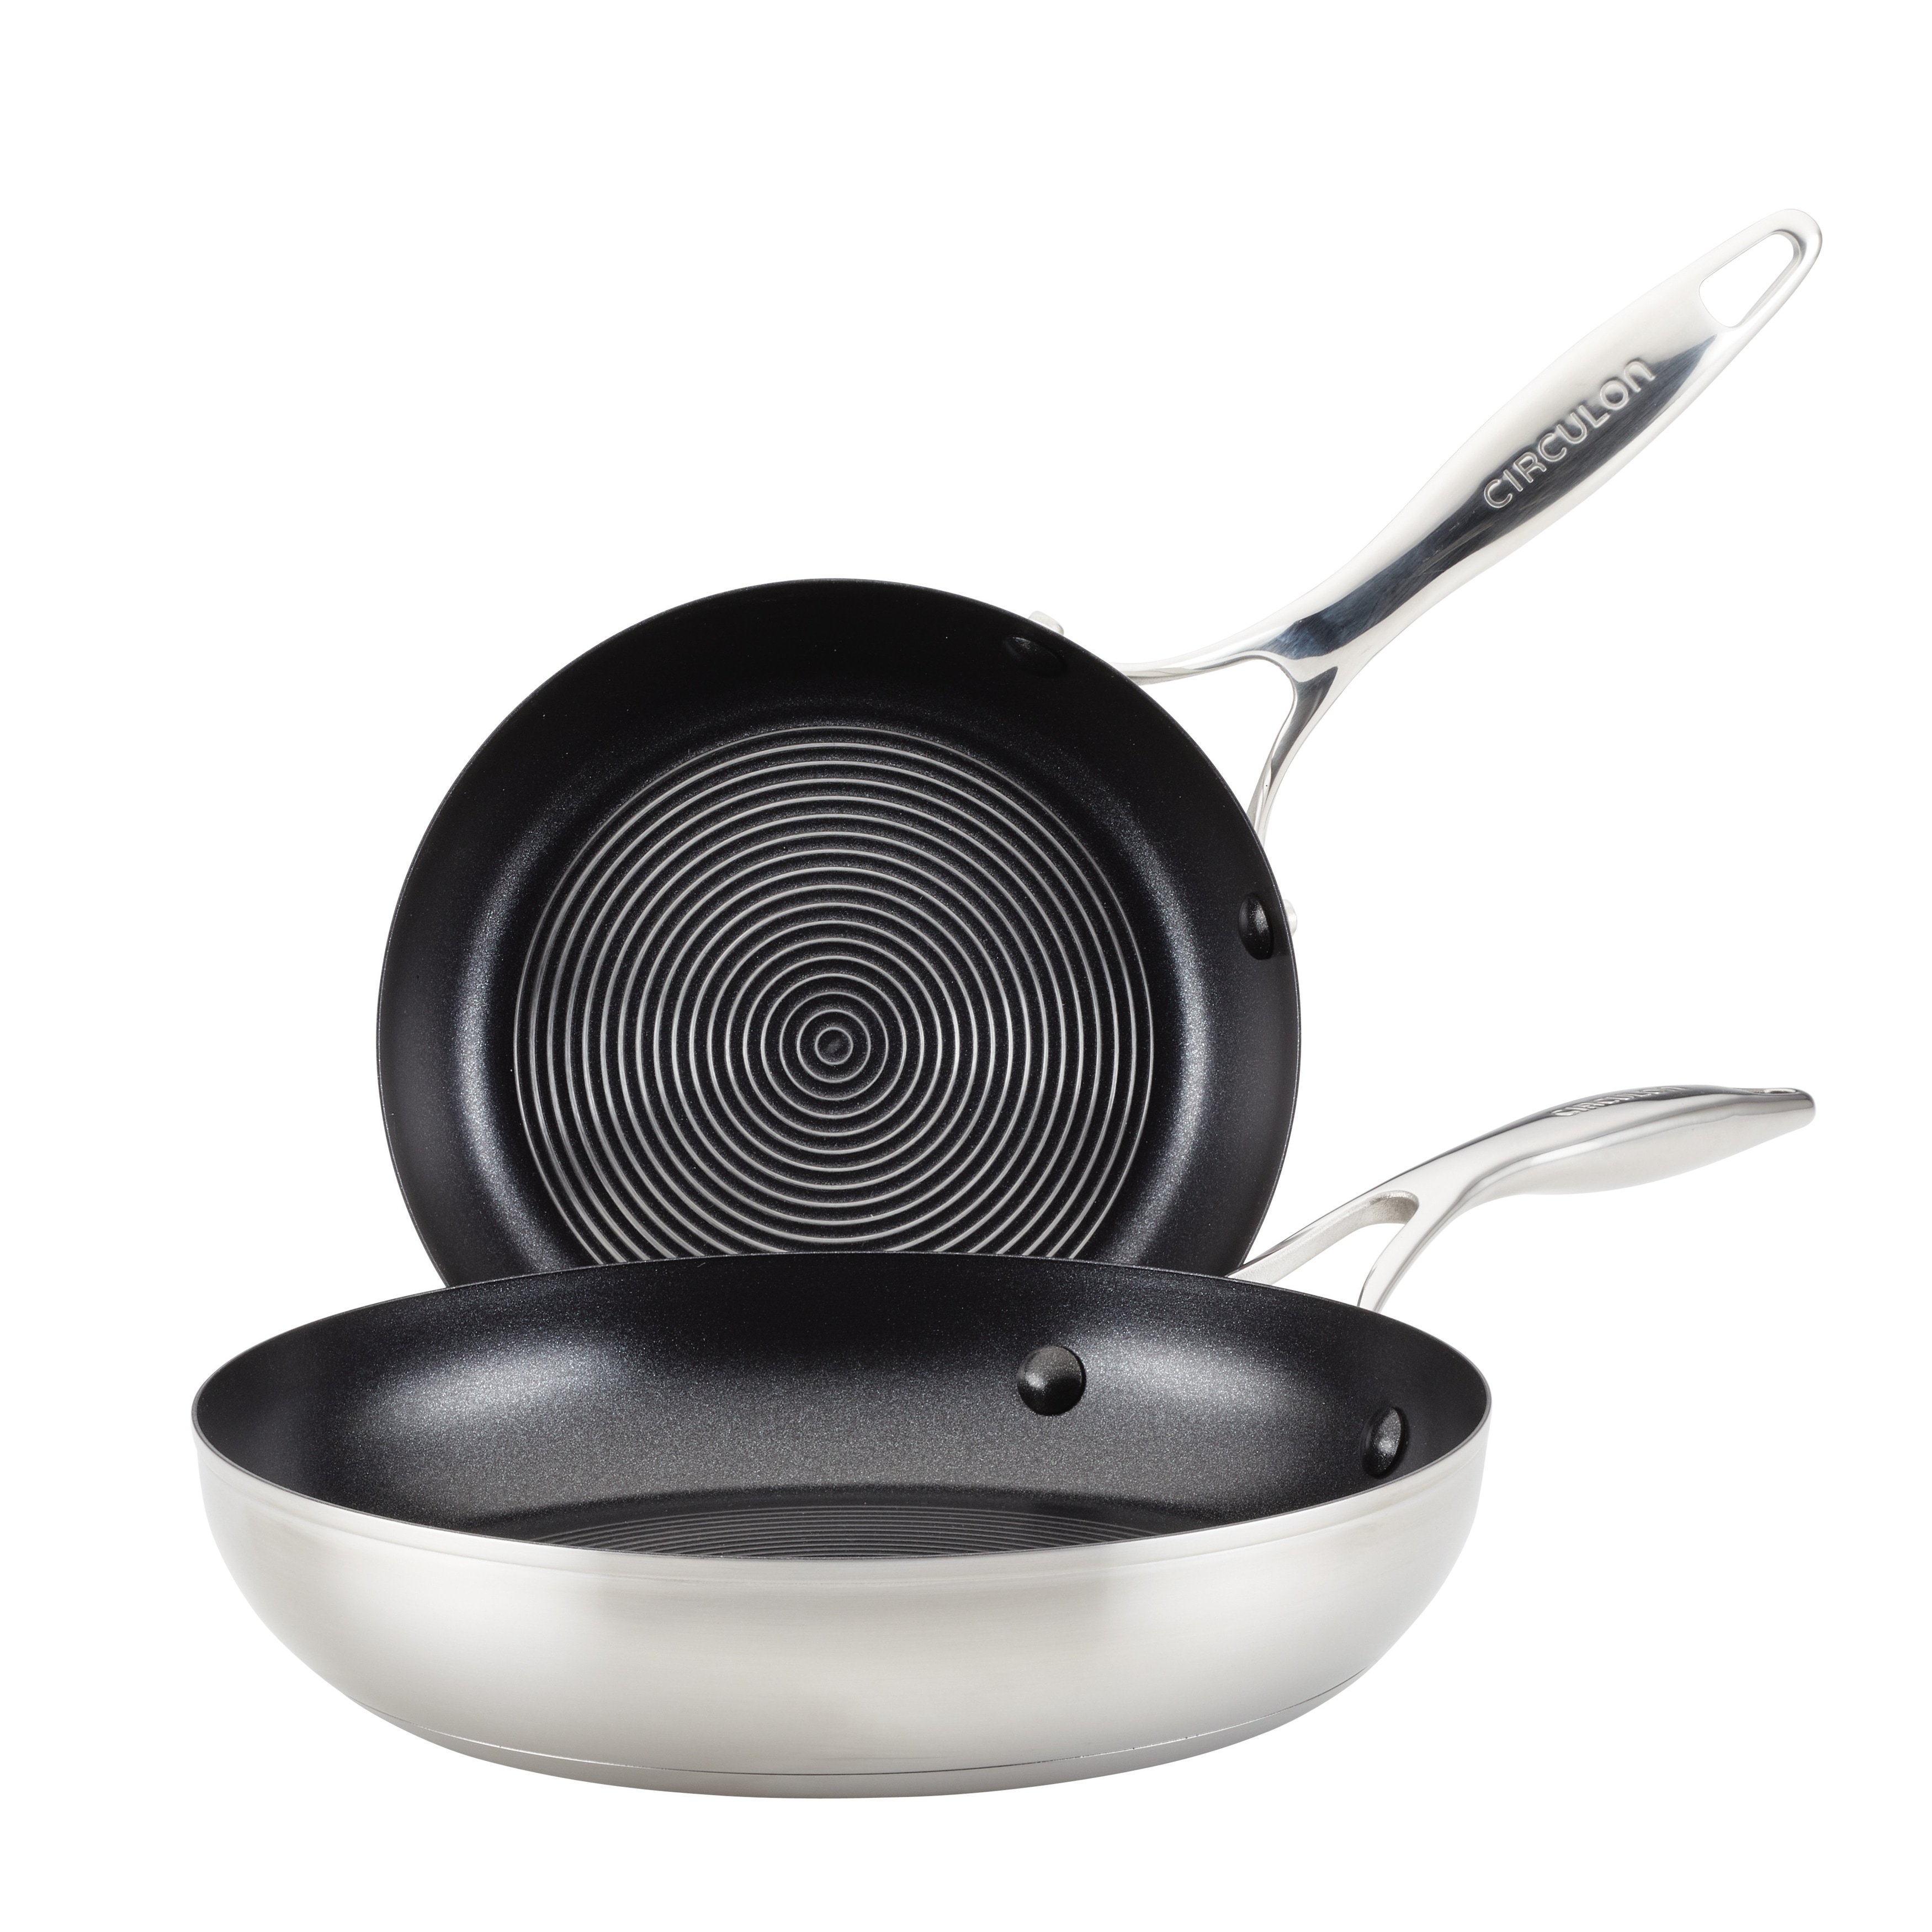 3-Quart Stainless Steel and Hybrid Nonstick Saute Pan with Lid